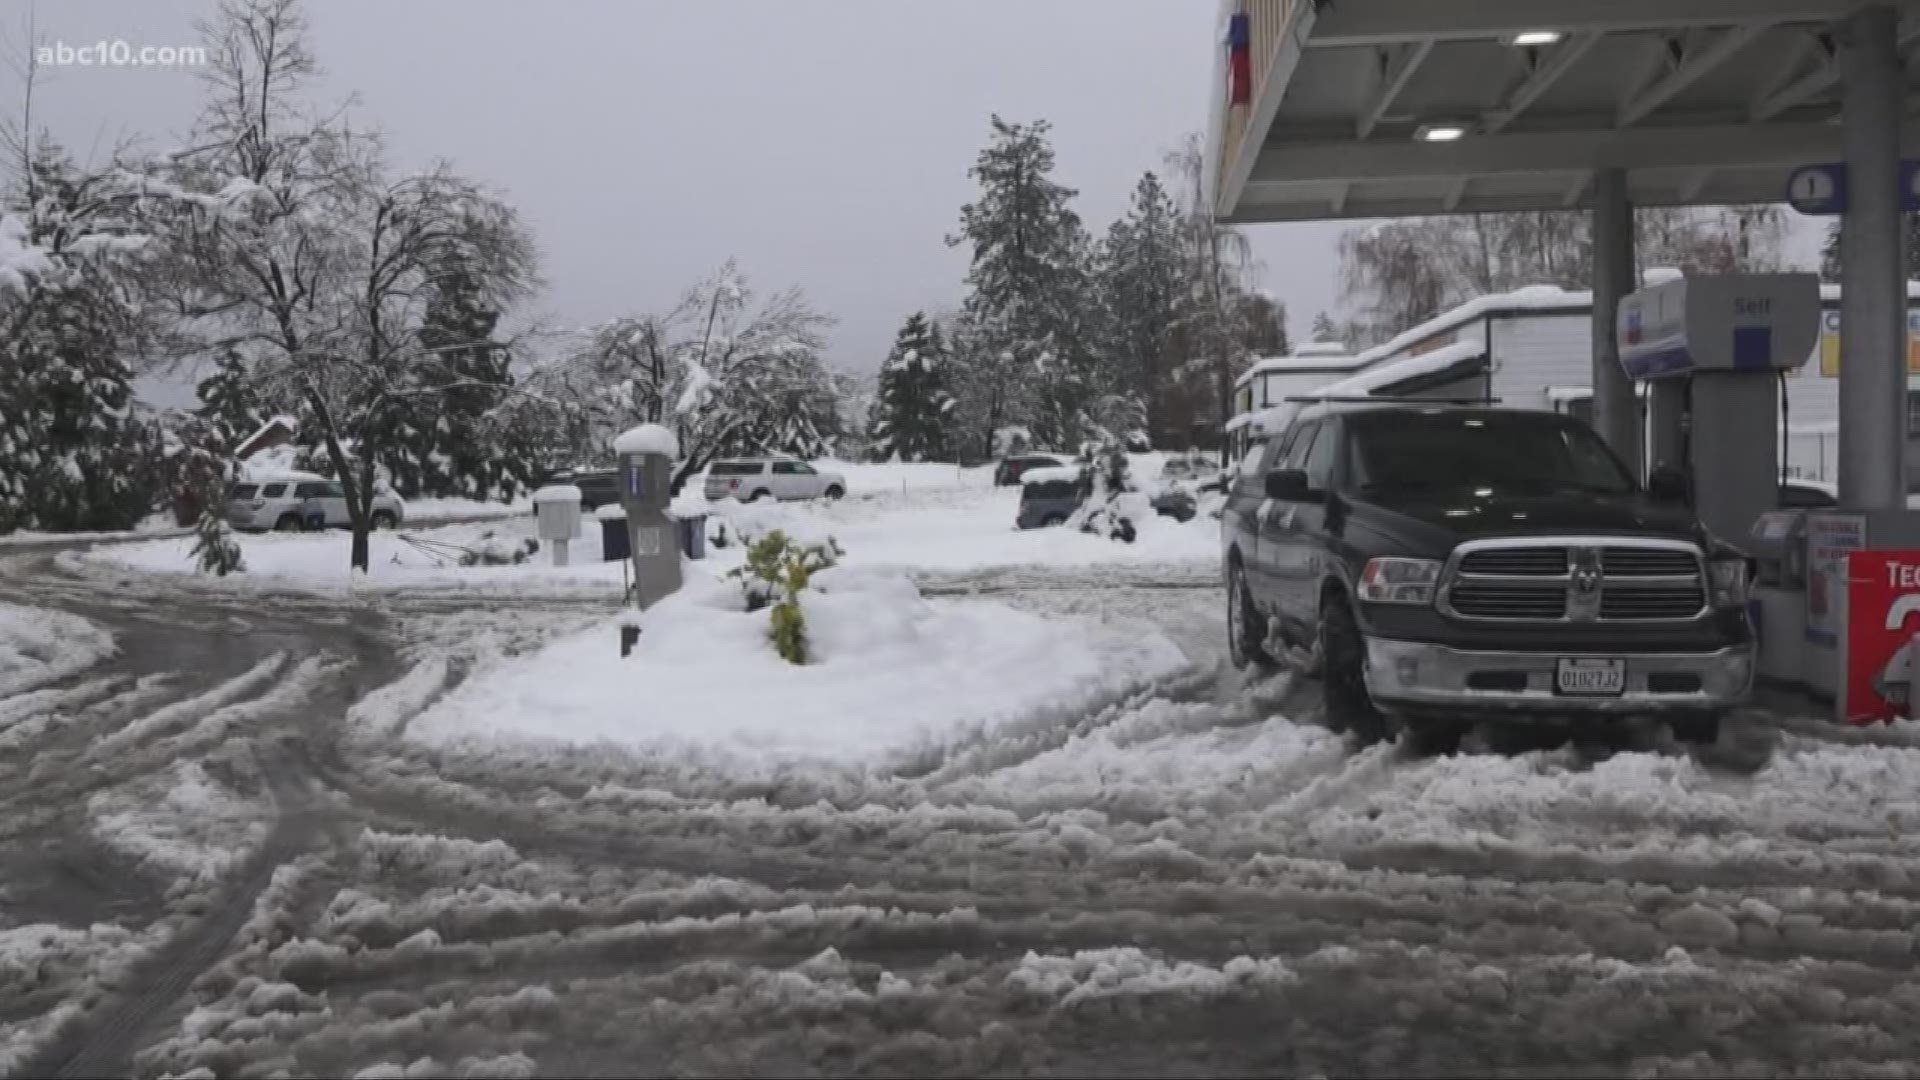 PG&E says thousands of its customers lost power because of the winter storm, while drivers had to stop and put chains on cars before heading out.